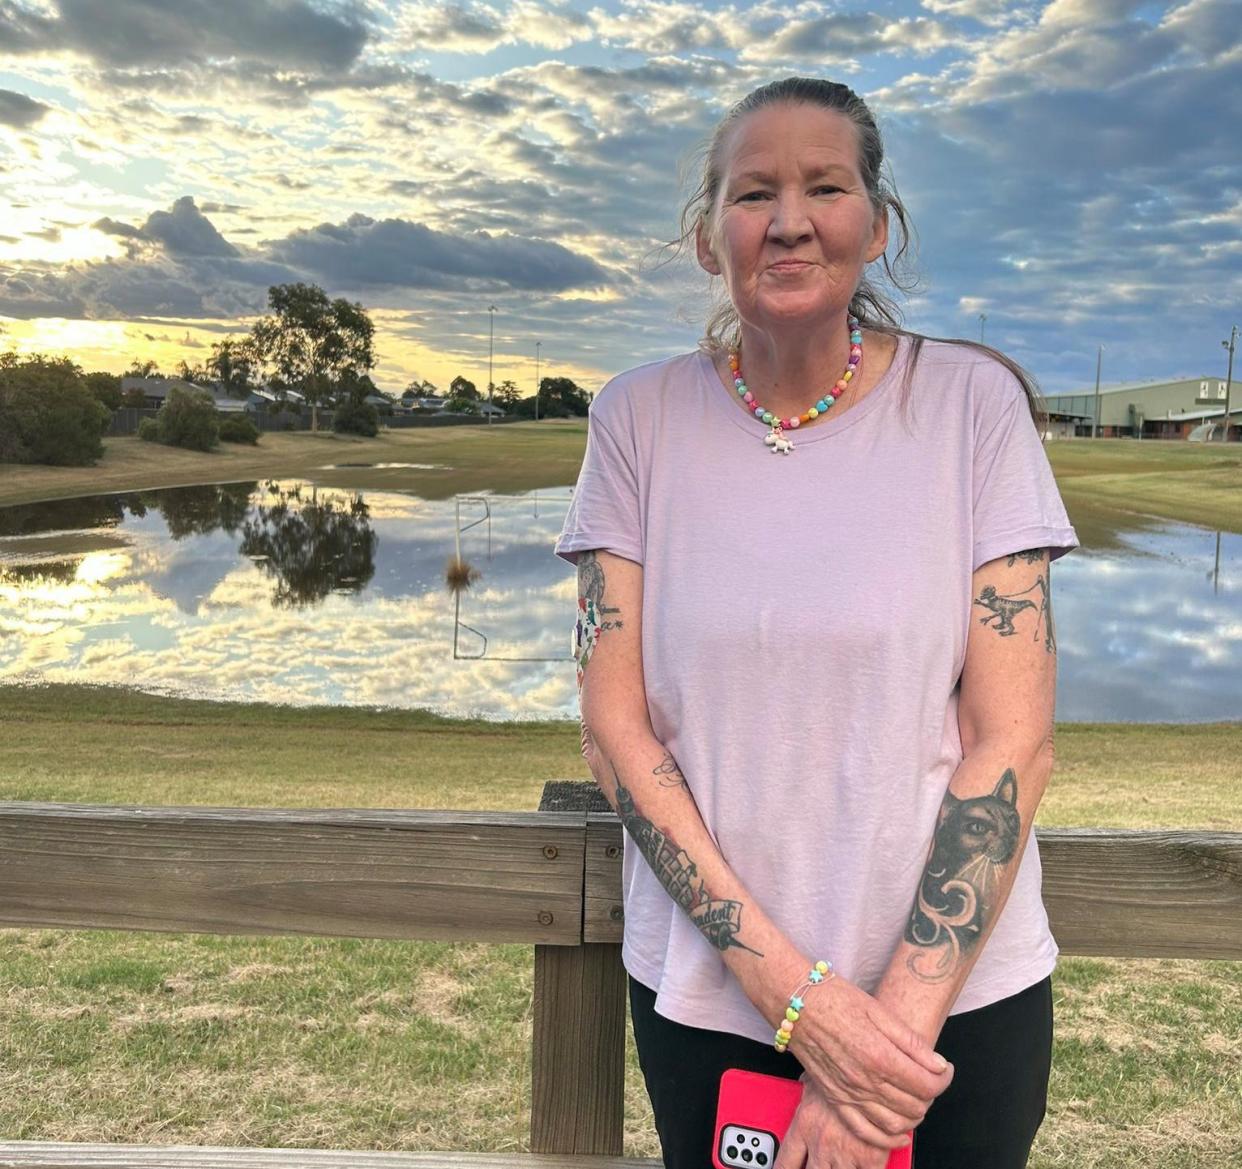 <span>Emma Bates was found dead in her home in Cobram, in Victoria's north, on Tuesday afternoon. John Torney has been charged with multiple counts of assault.</span><span>Photograph: Supplied by the family</span>